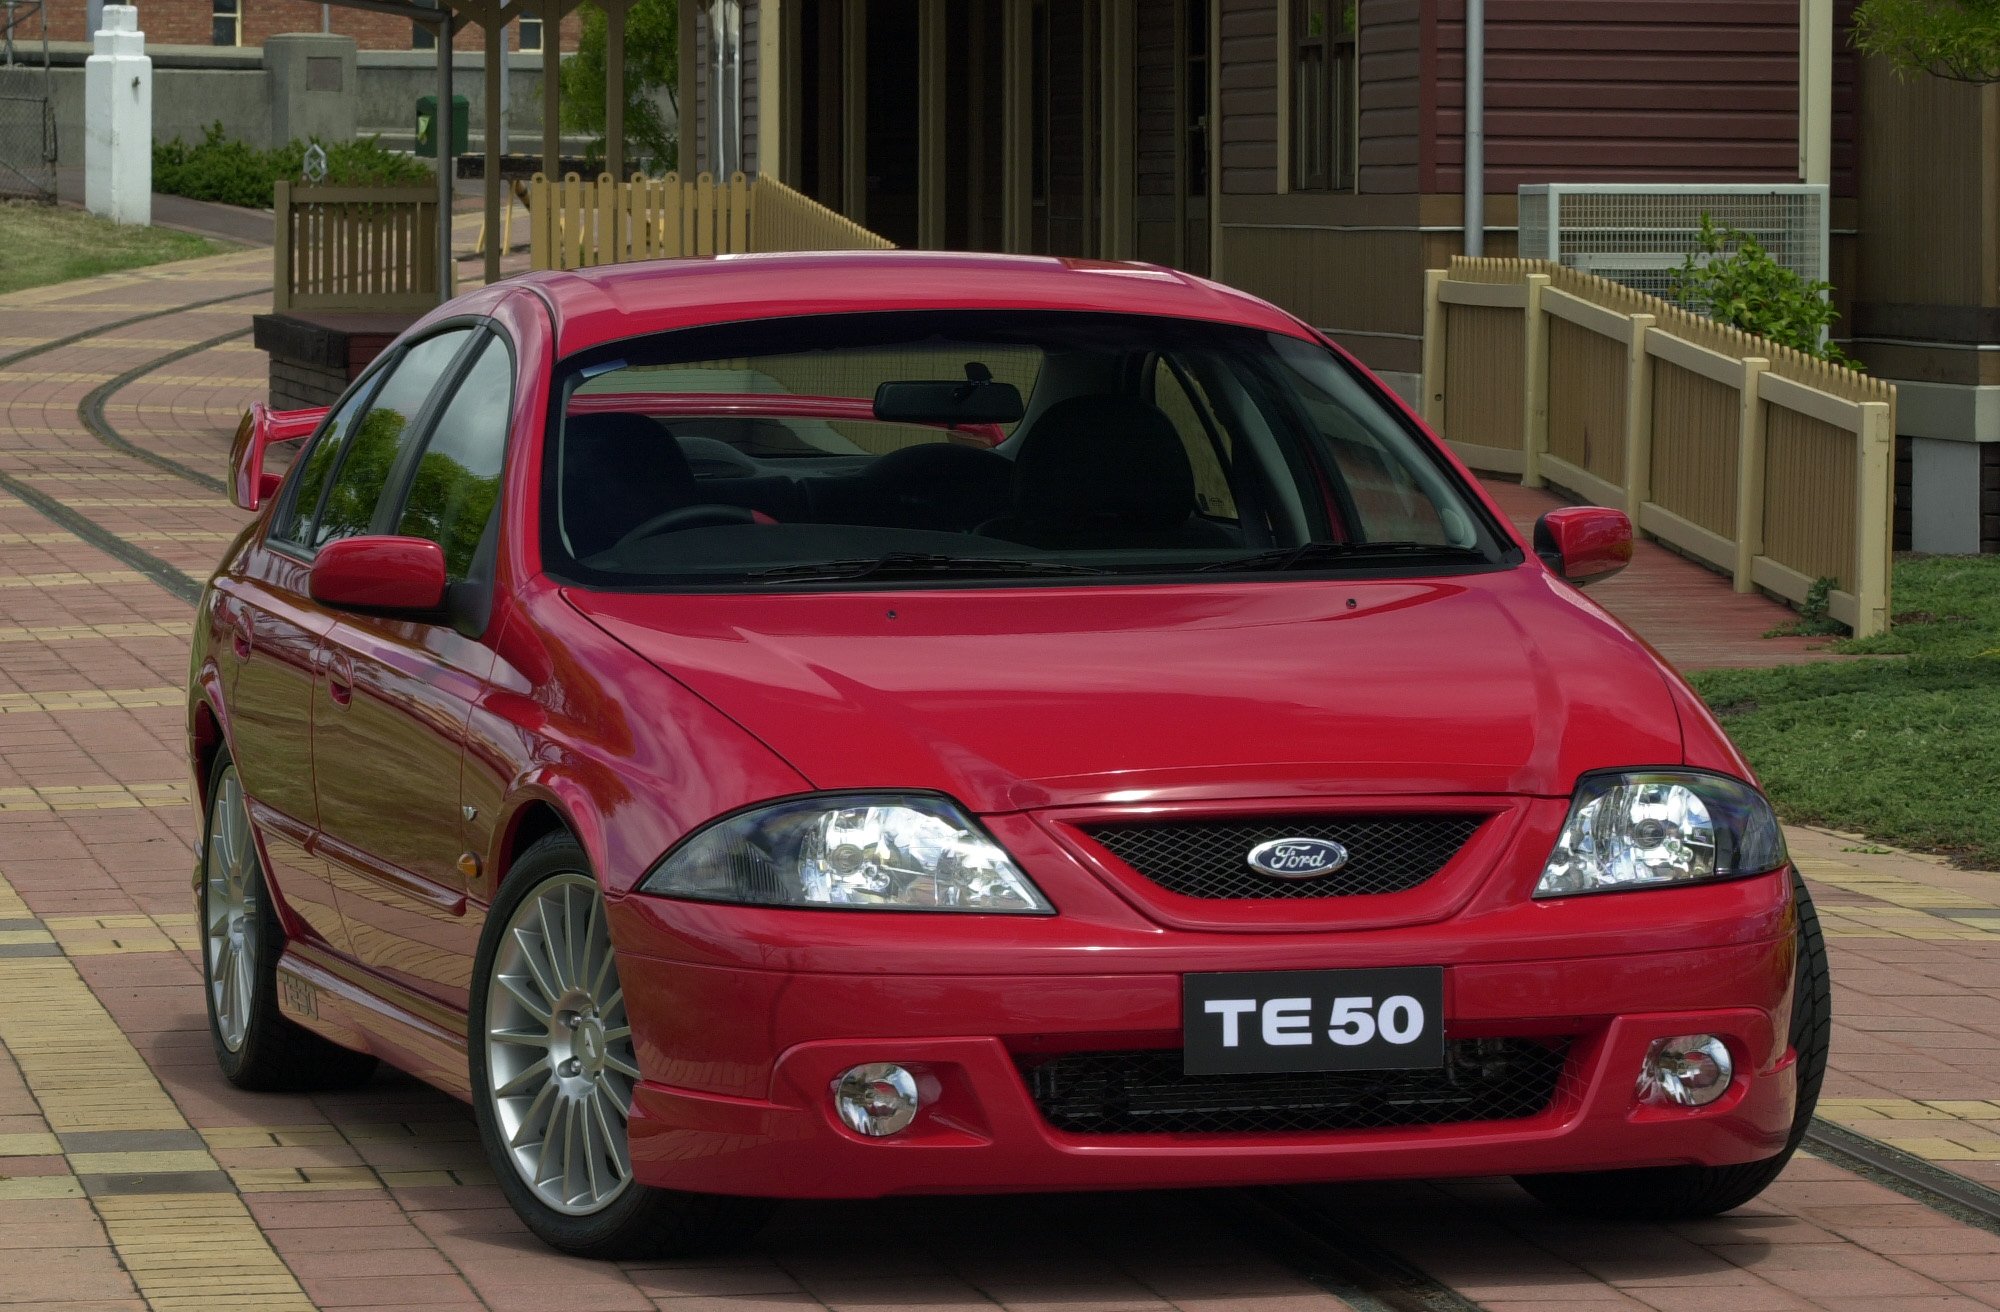 2001, Fte, Tickford, Te50, Ford, Muscle Wallpaper